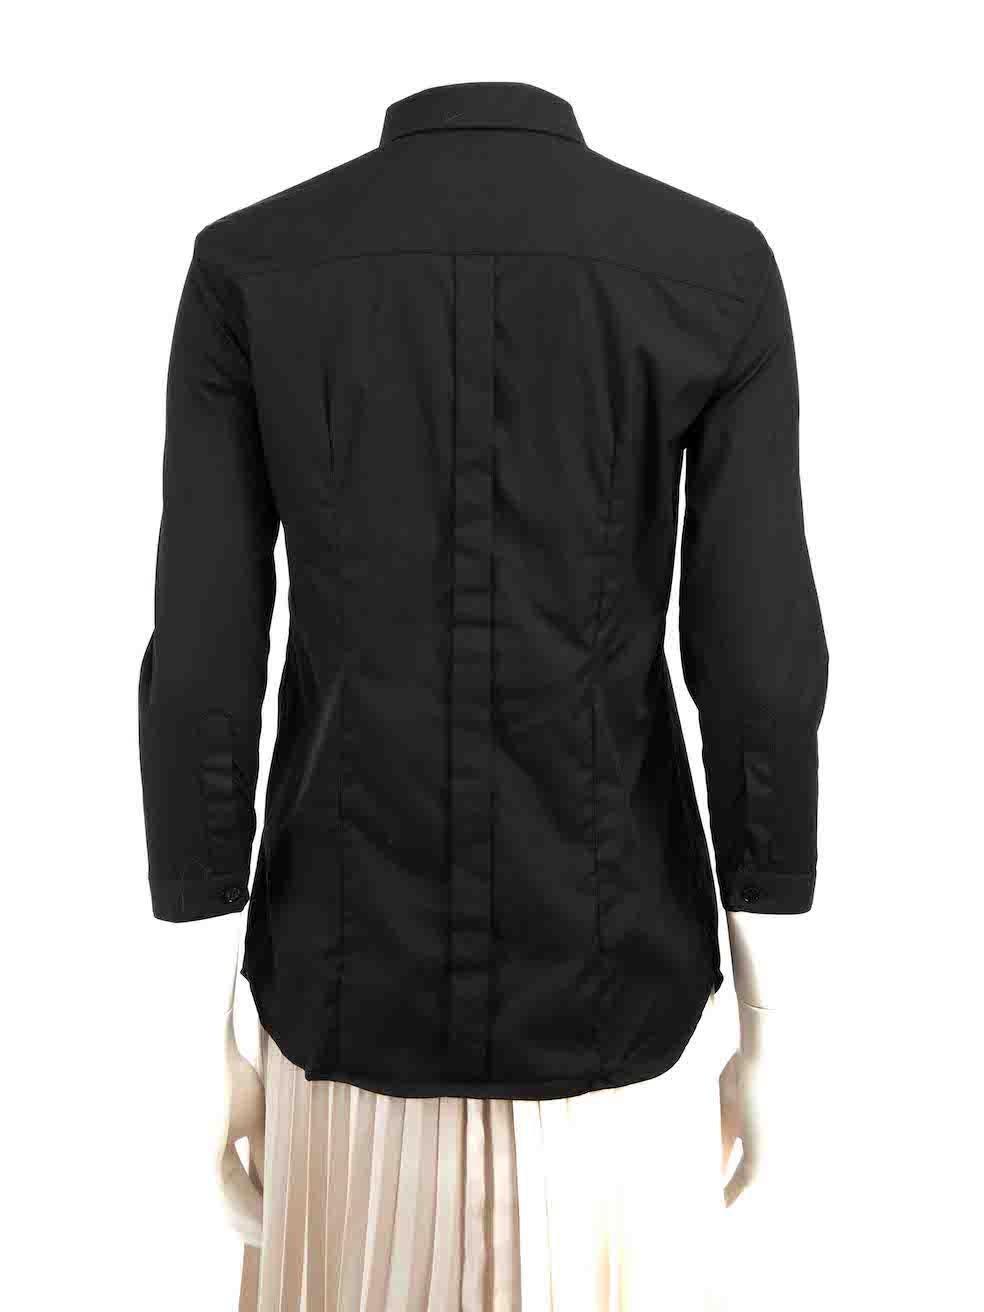 Burberry Black Button Down Collared Shirt Size S In Good Condition For Sale In London, GB